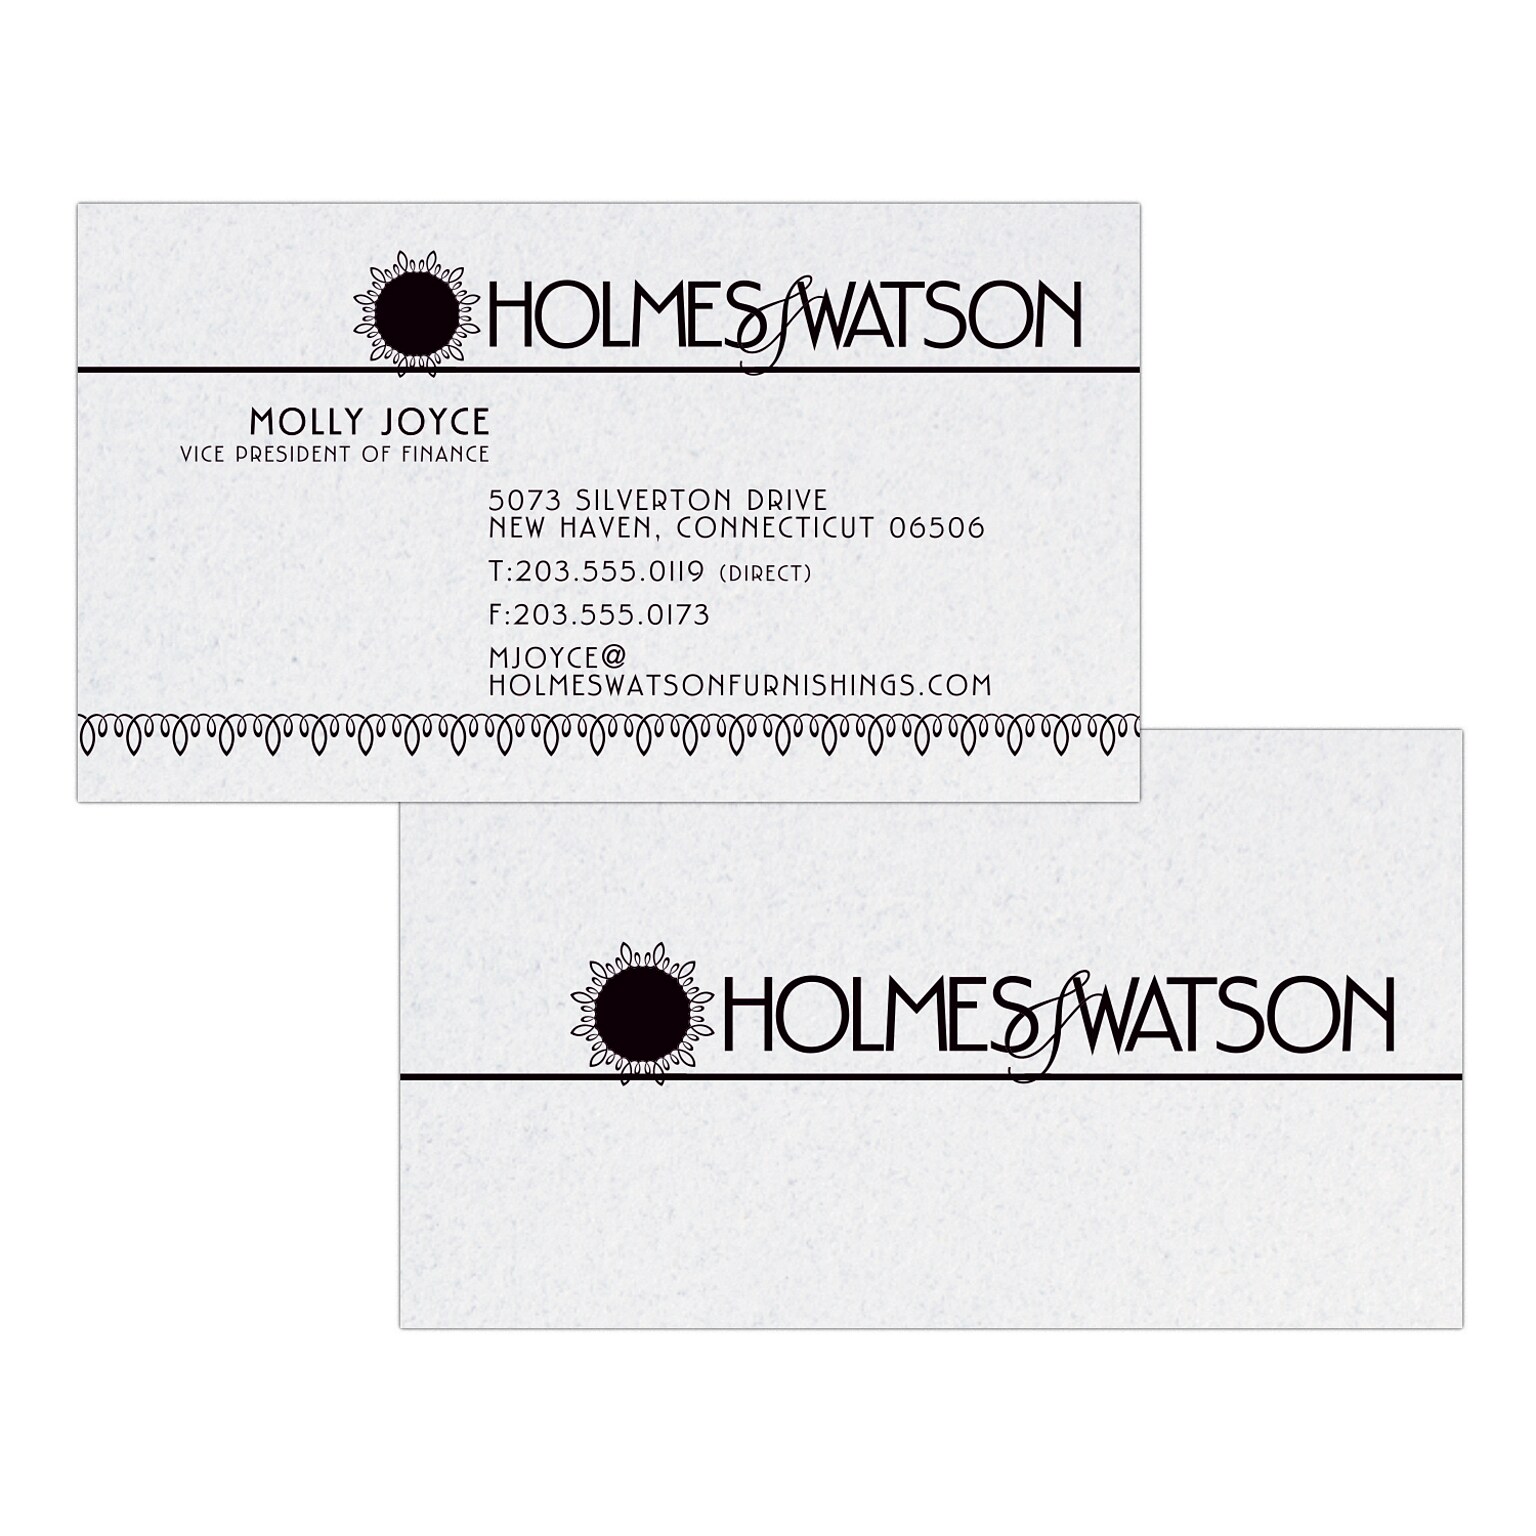 Custom 1-2 Color Business Cards, CLASSIC CREST® Smooth Whitestone 80#, Flat Print, 1 Standard Ink, 2-Sided, 250/PK